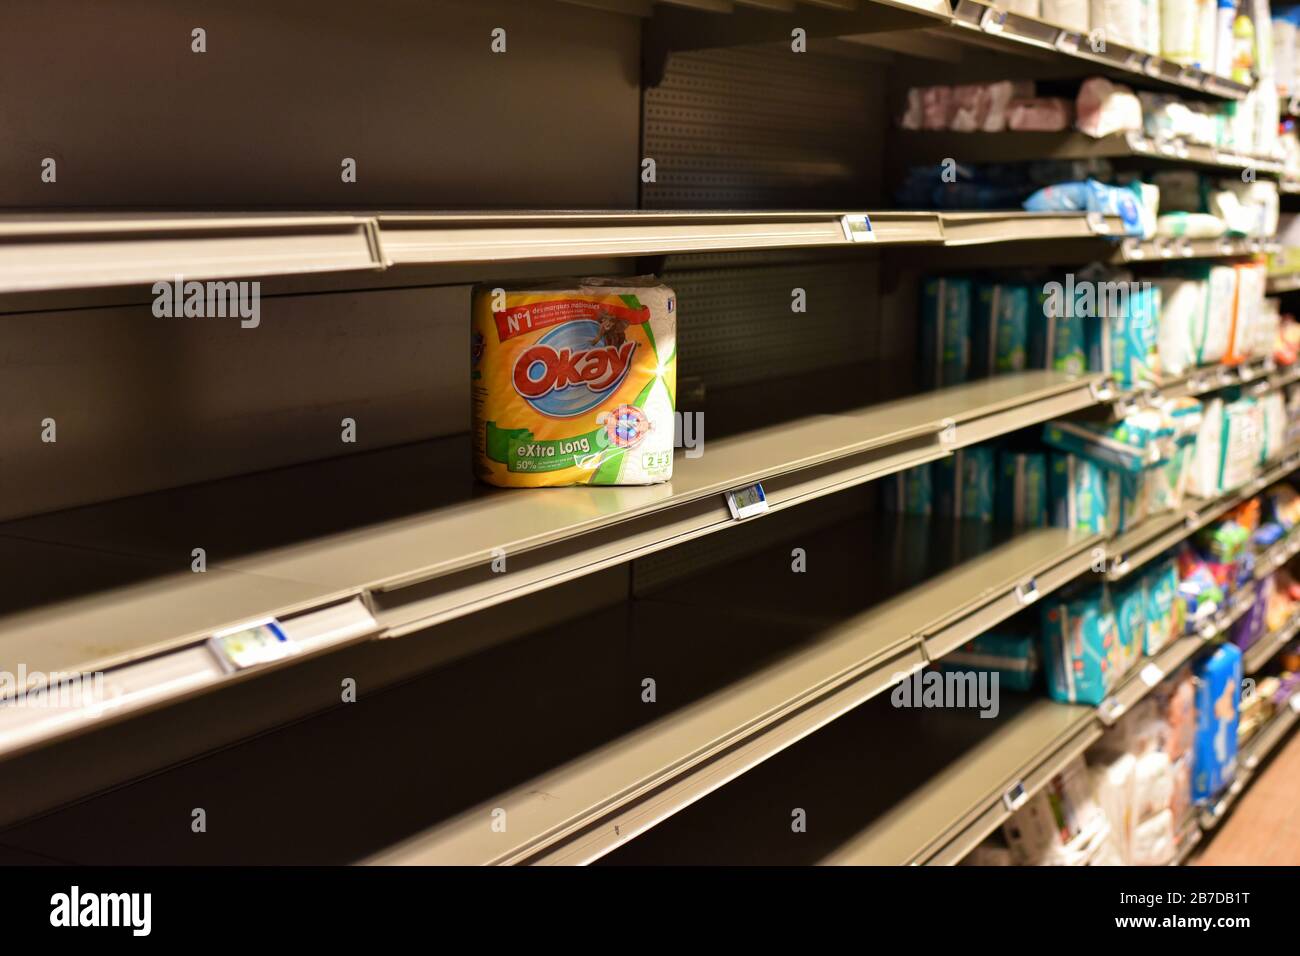 PARIS, FRANCE - MARCH 15, 2020: Toilet paper shortage on the shelves of French supermarkets from coronavirus panic. Stock Photo